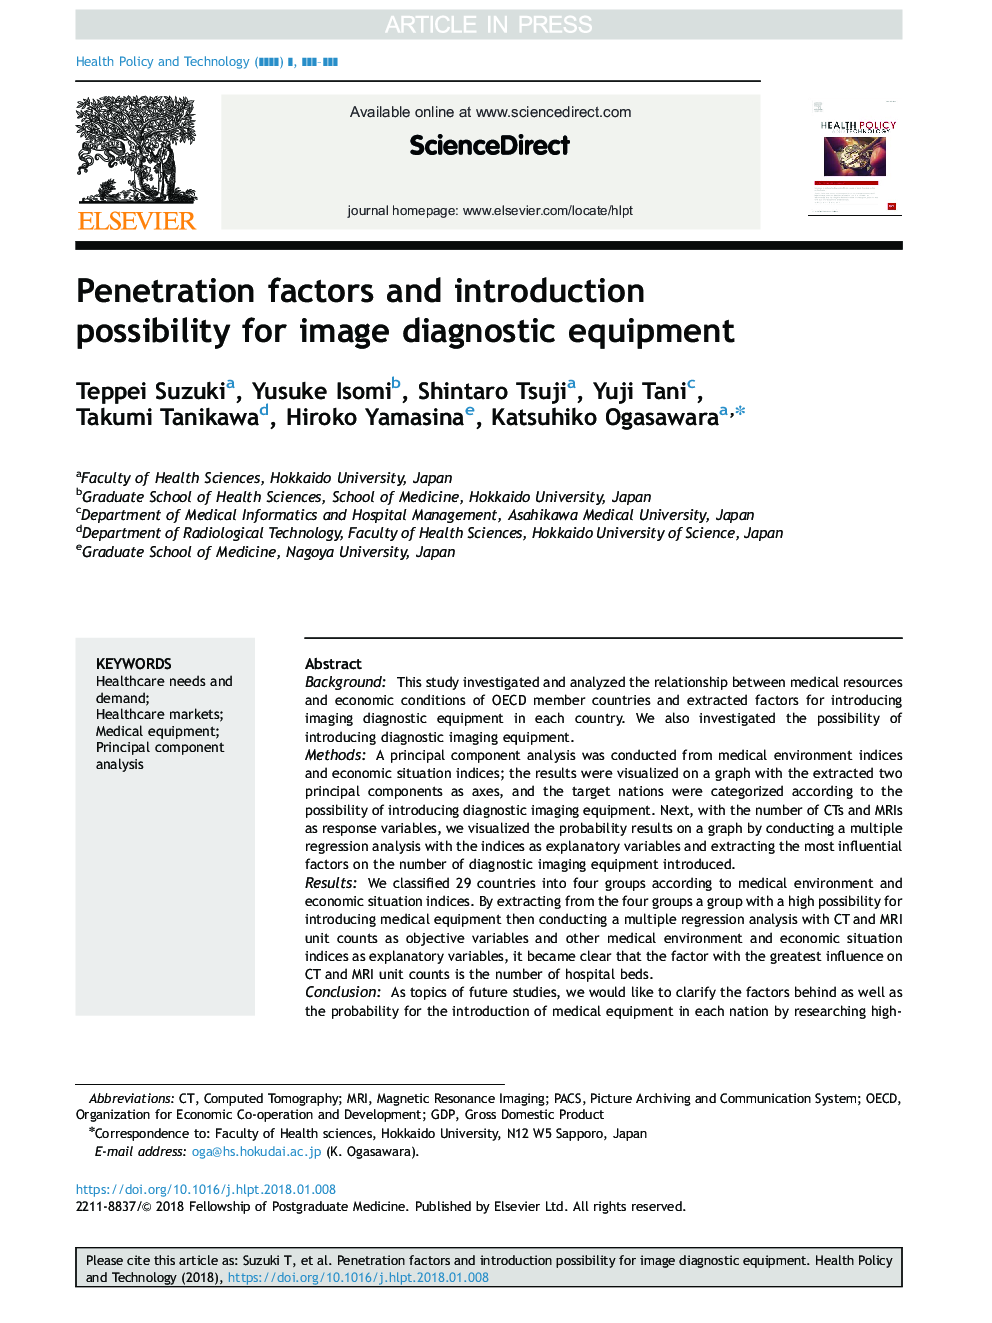 Penetration factors and introduction possibility for image diagnostic equipment